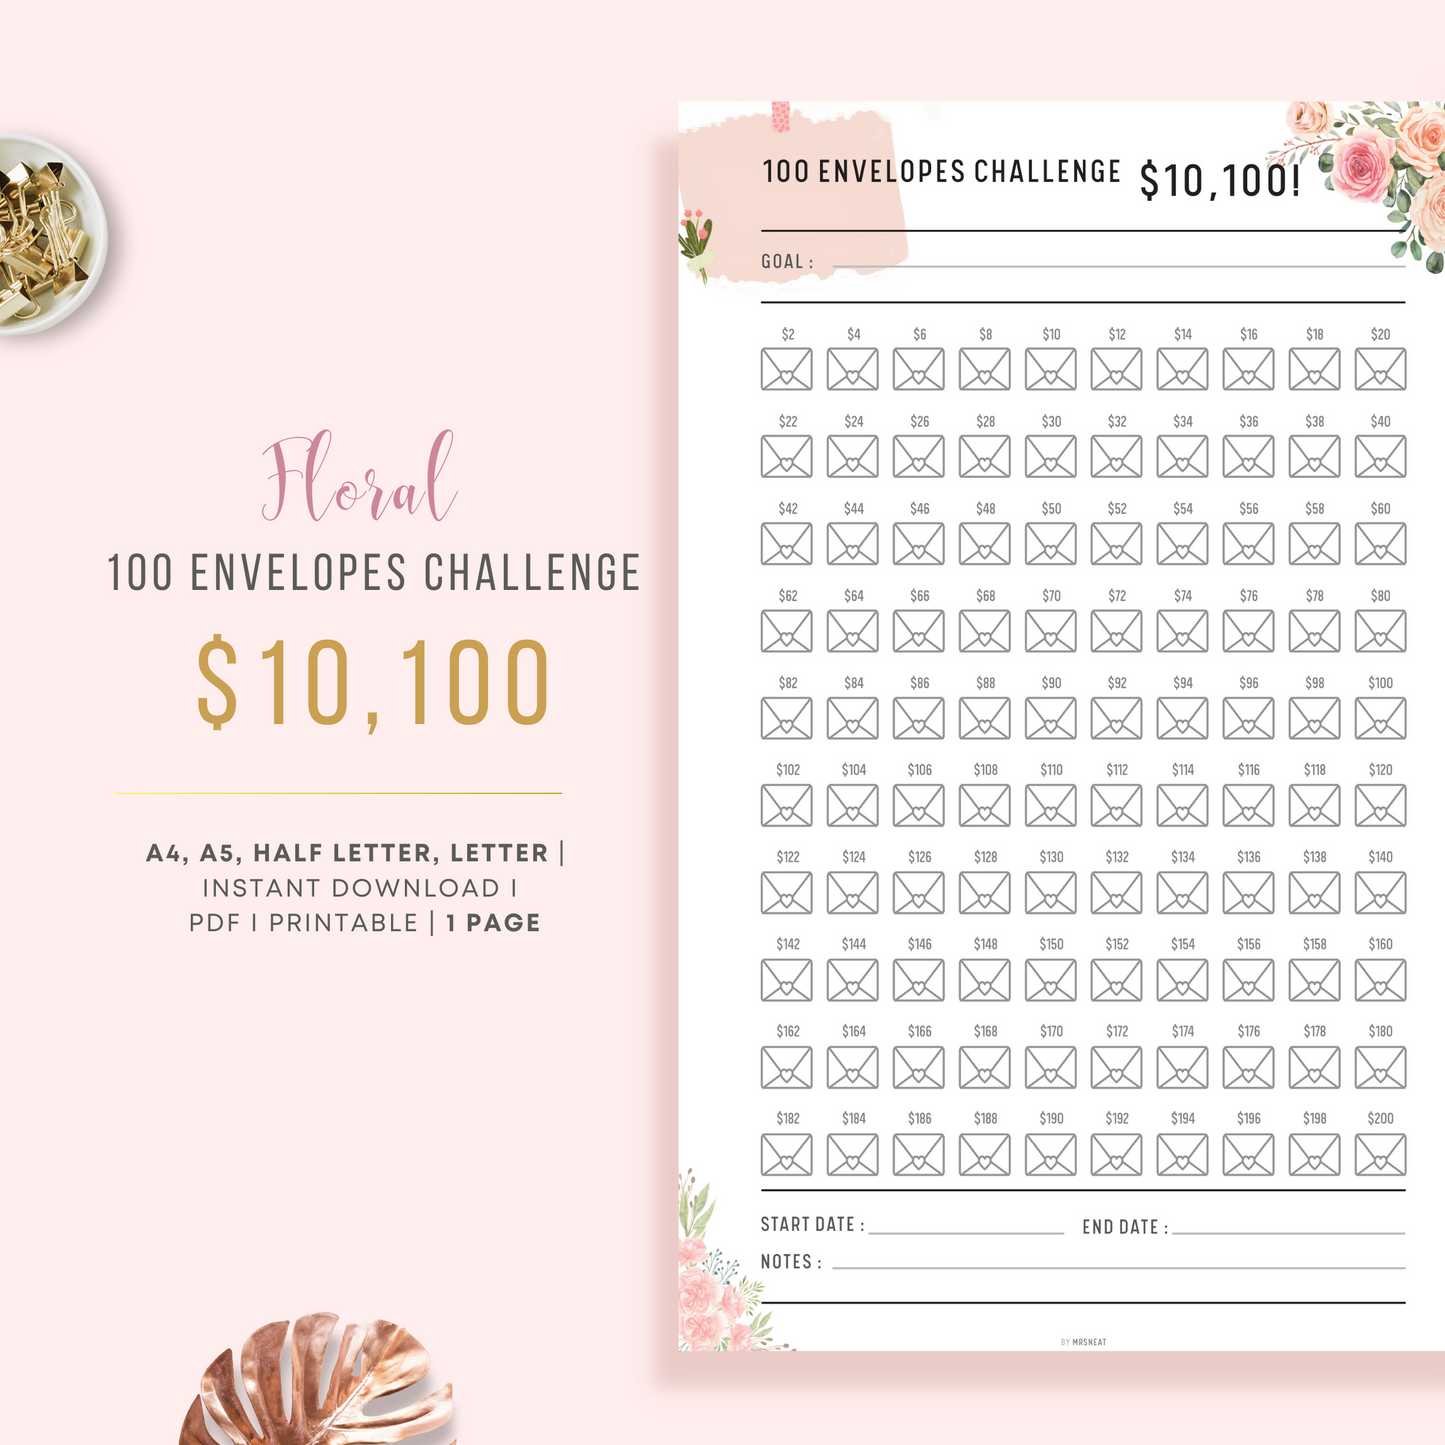 Floral $10,100 in 100 Envelope Challenge Planner with goal, notes, start and finish date